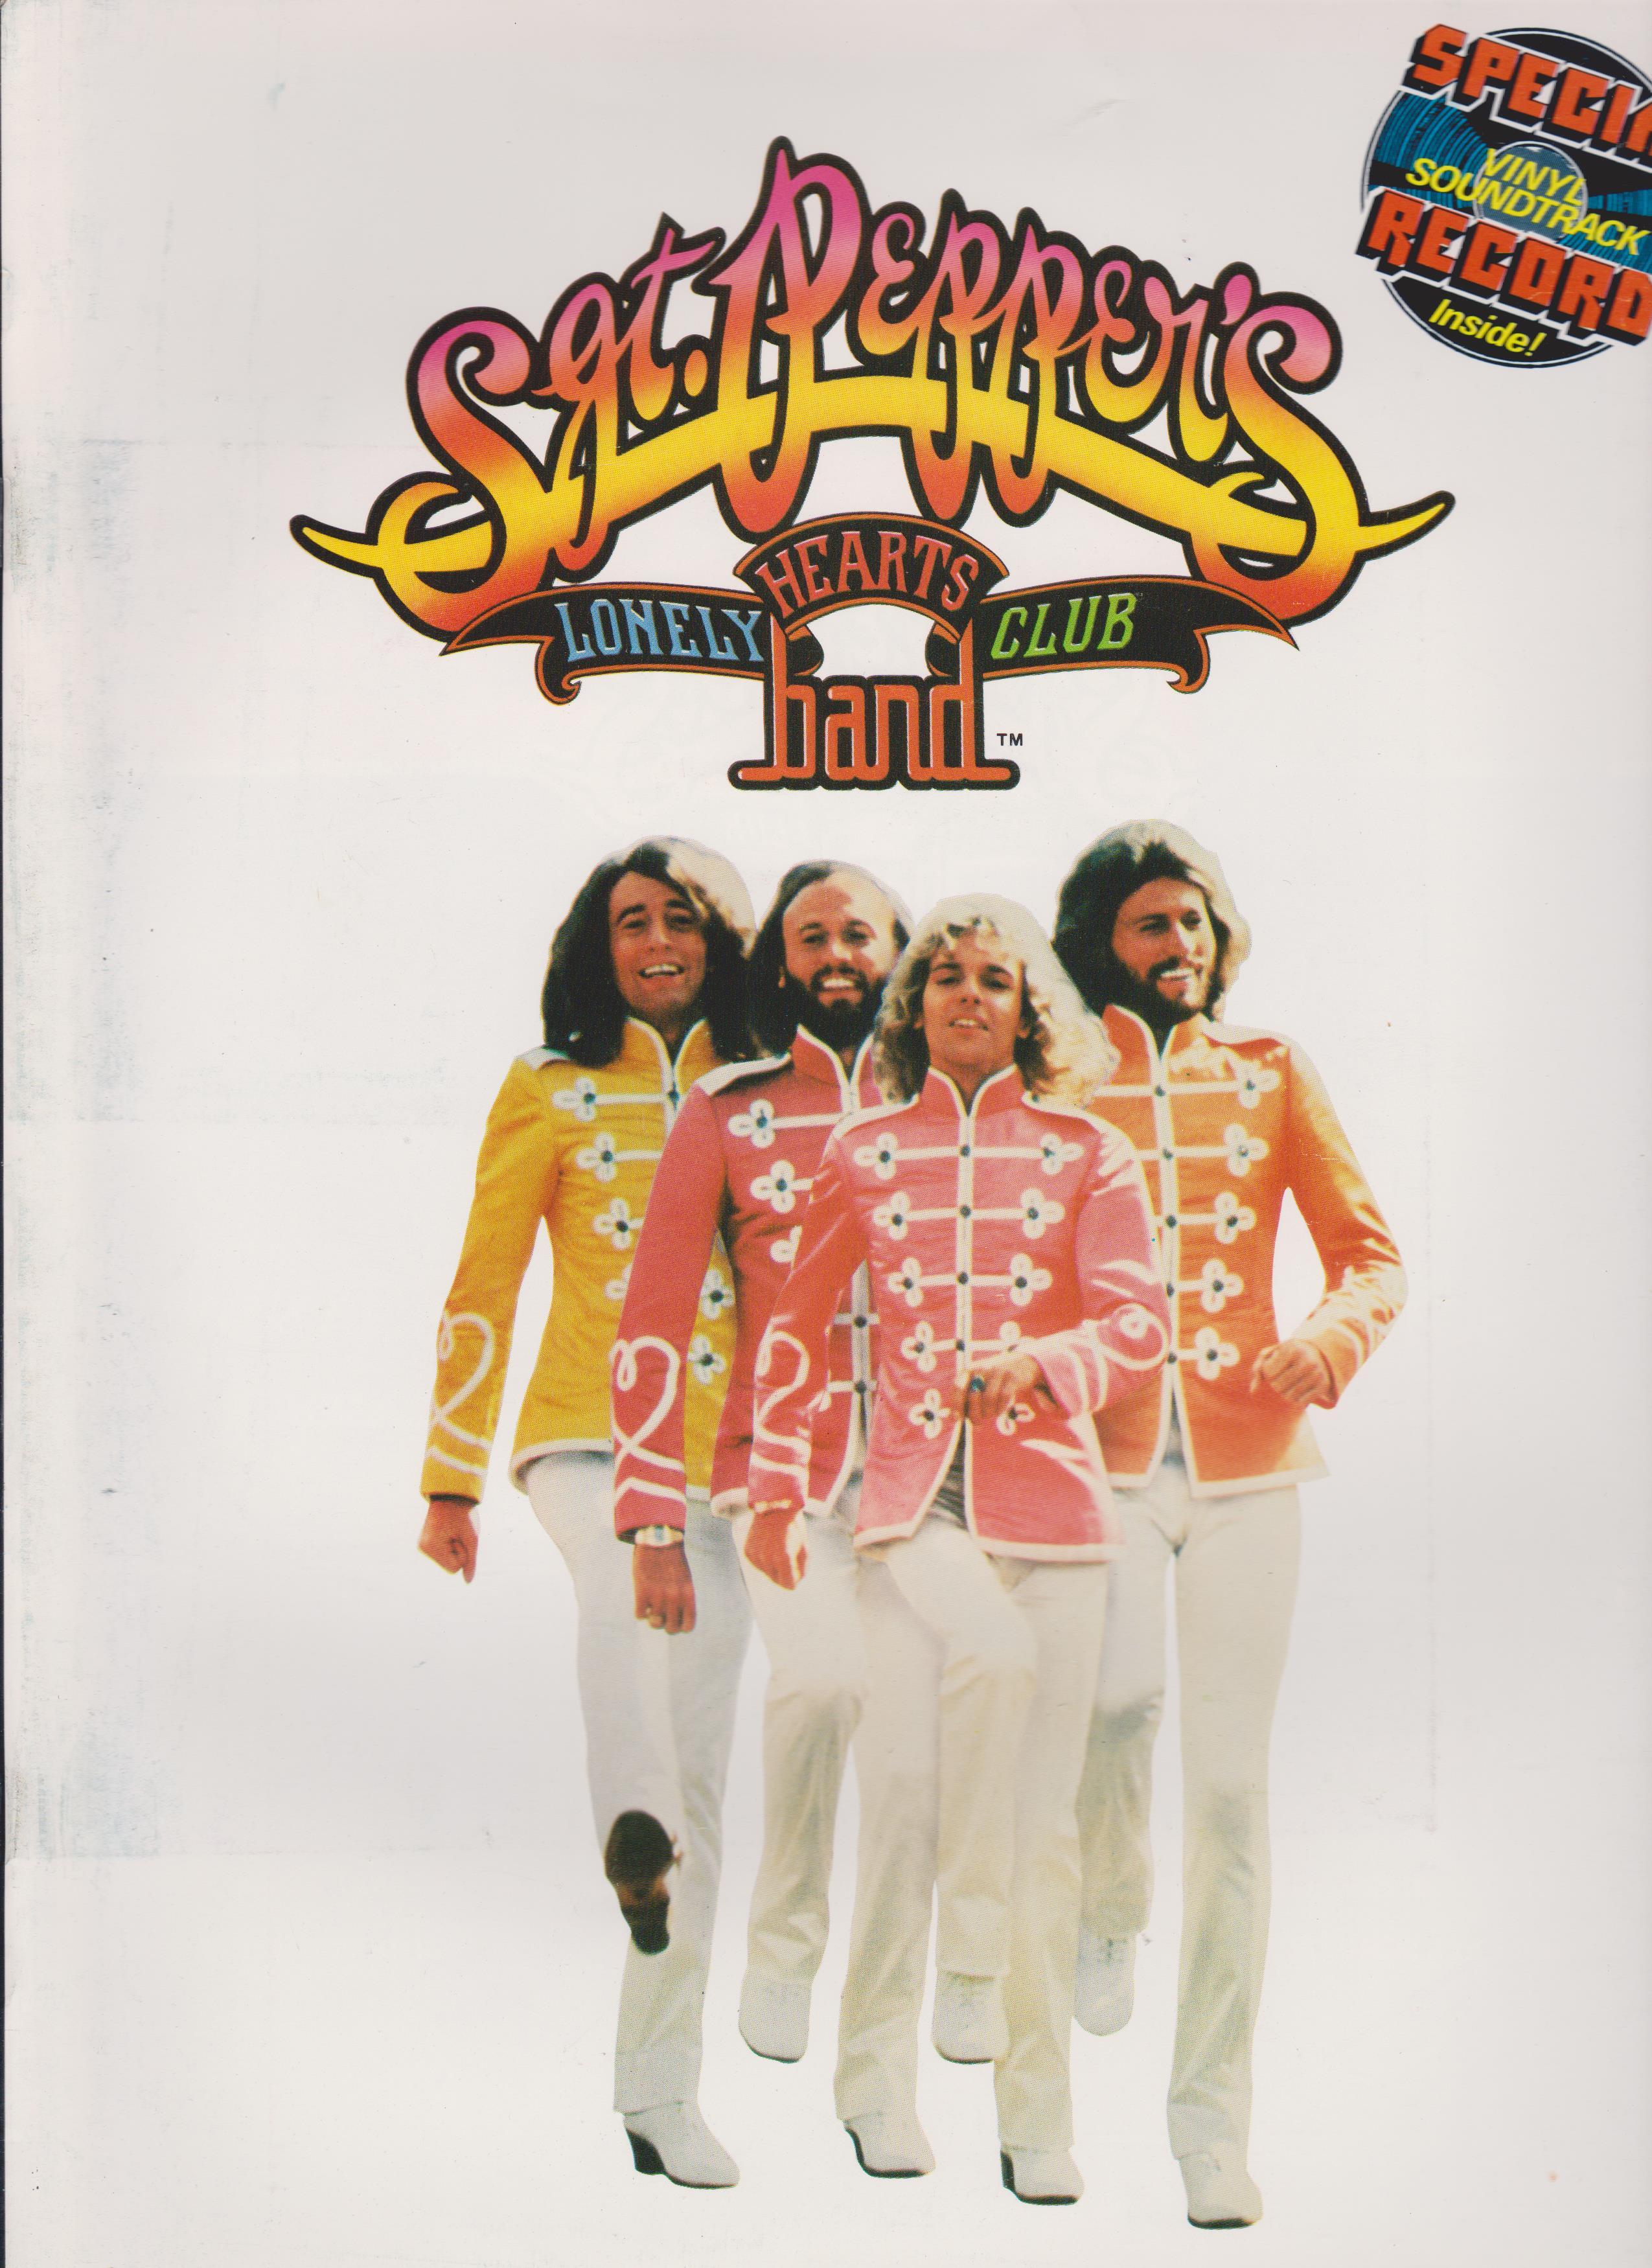 Sgt. Pepper's Lonely Hearts Club Band Main Poster